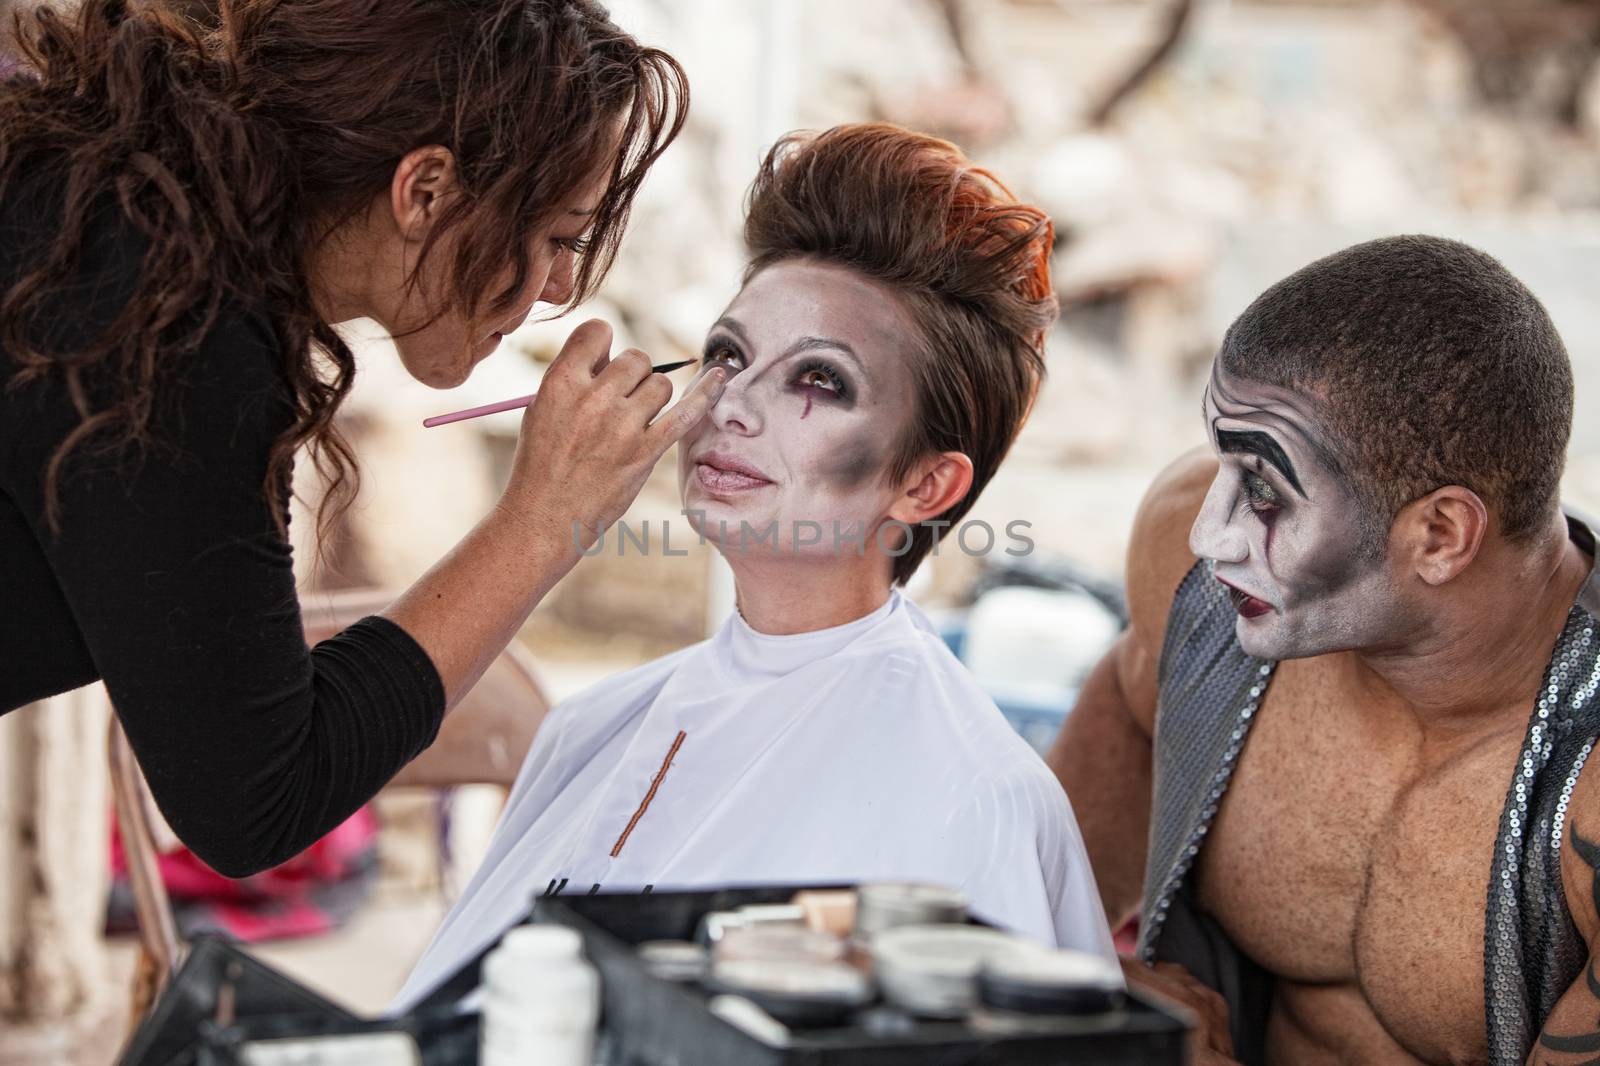 Male clown looking at woman getting makeup backstage